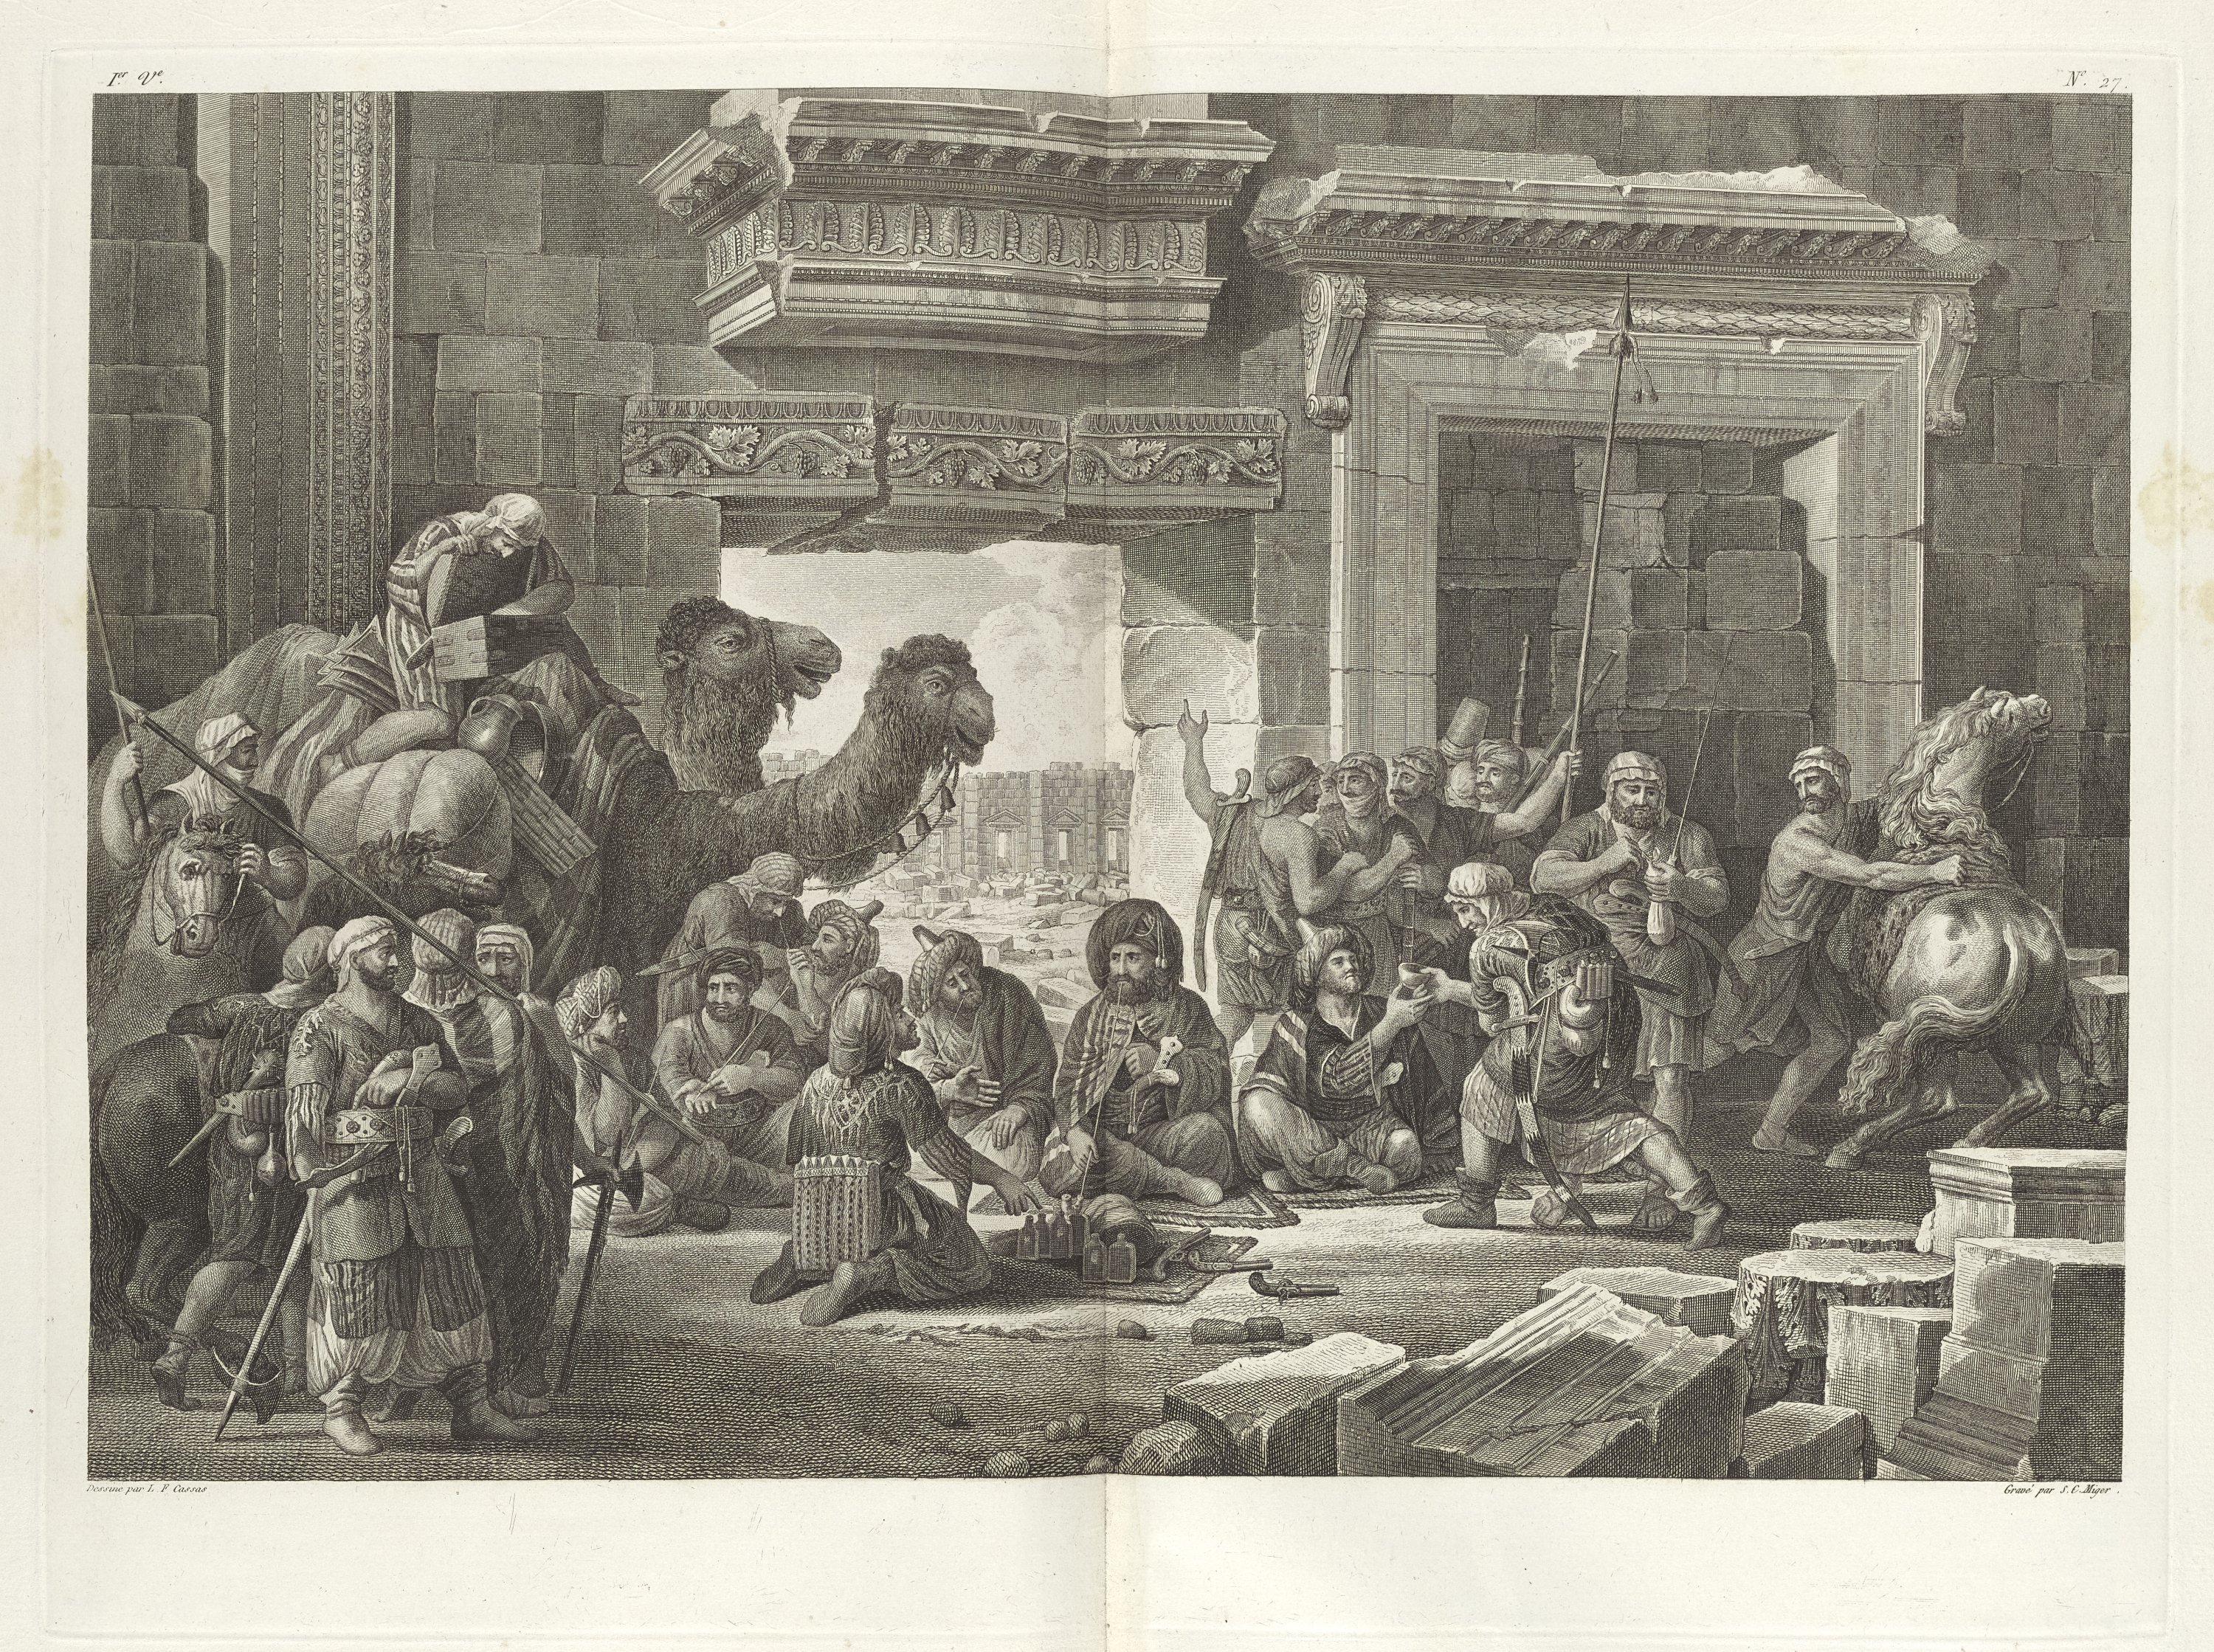 'Louis-François Cassas presenting gifts to Bedouin sheikhs' by Simon-Charles Miger after Louis-François Cassas, etching, 21.5 by 41 centimeters. (Courtesy of Getty)

